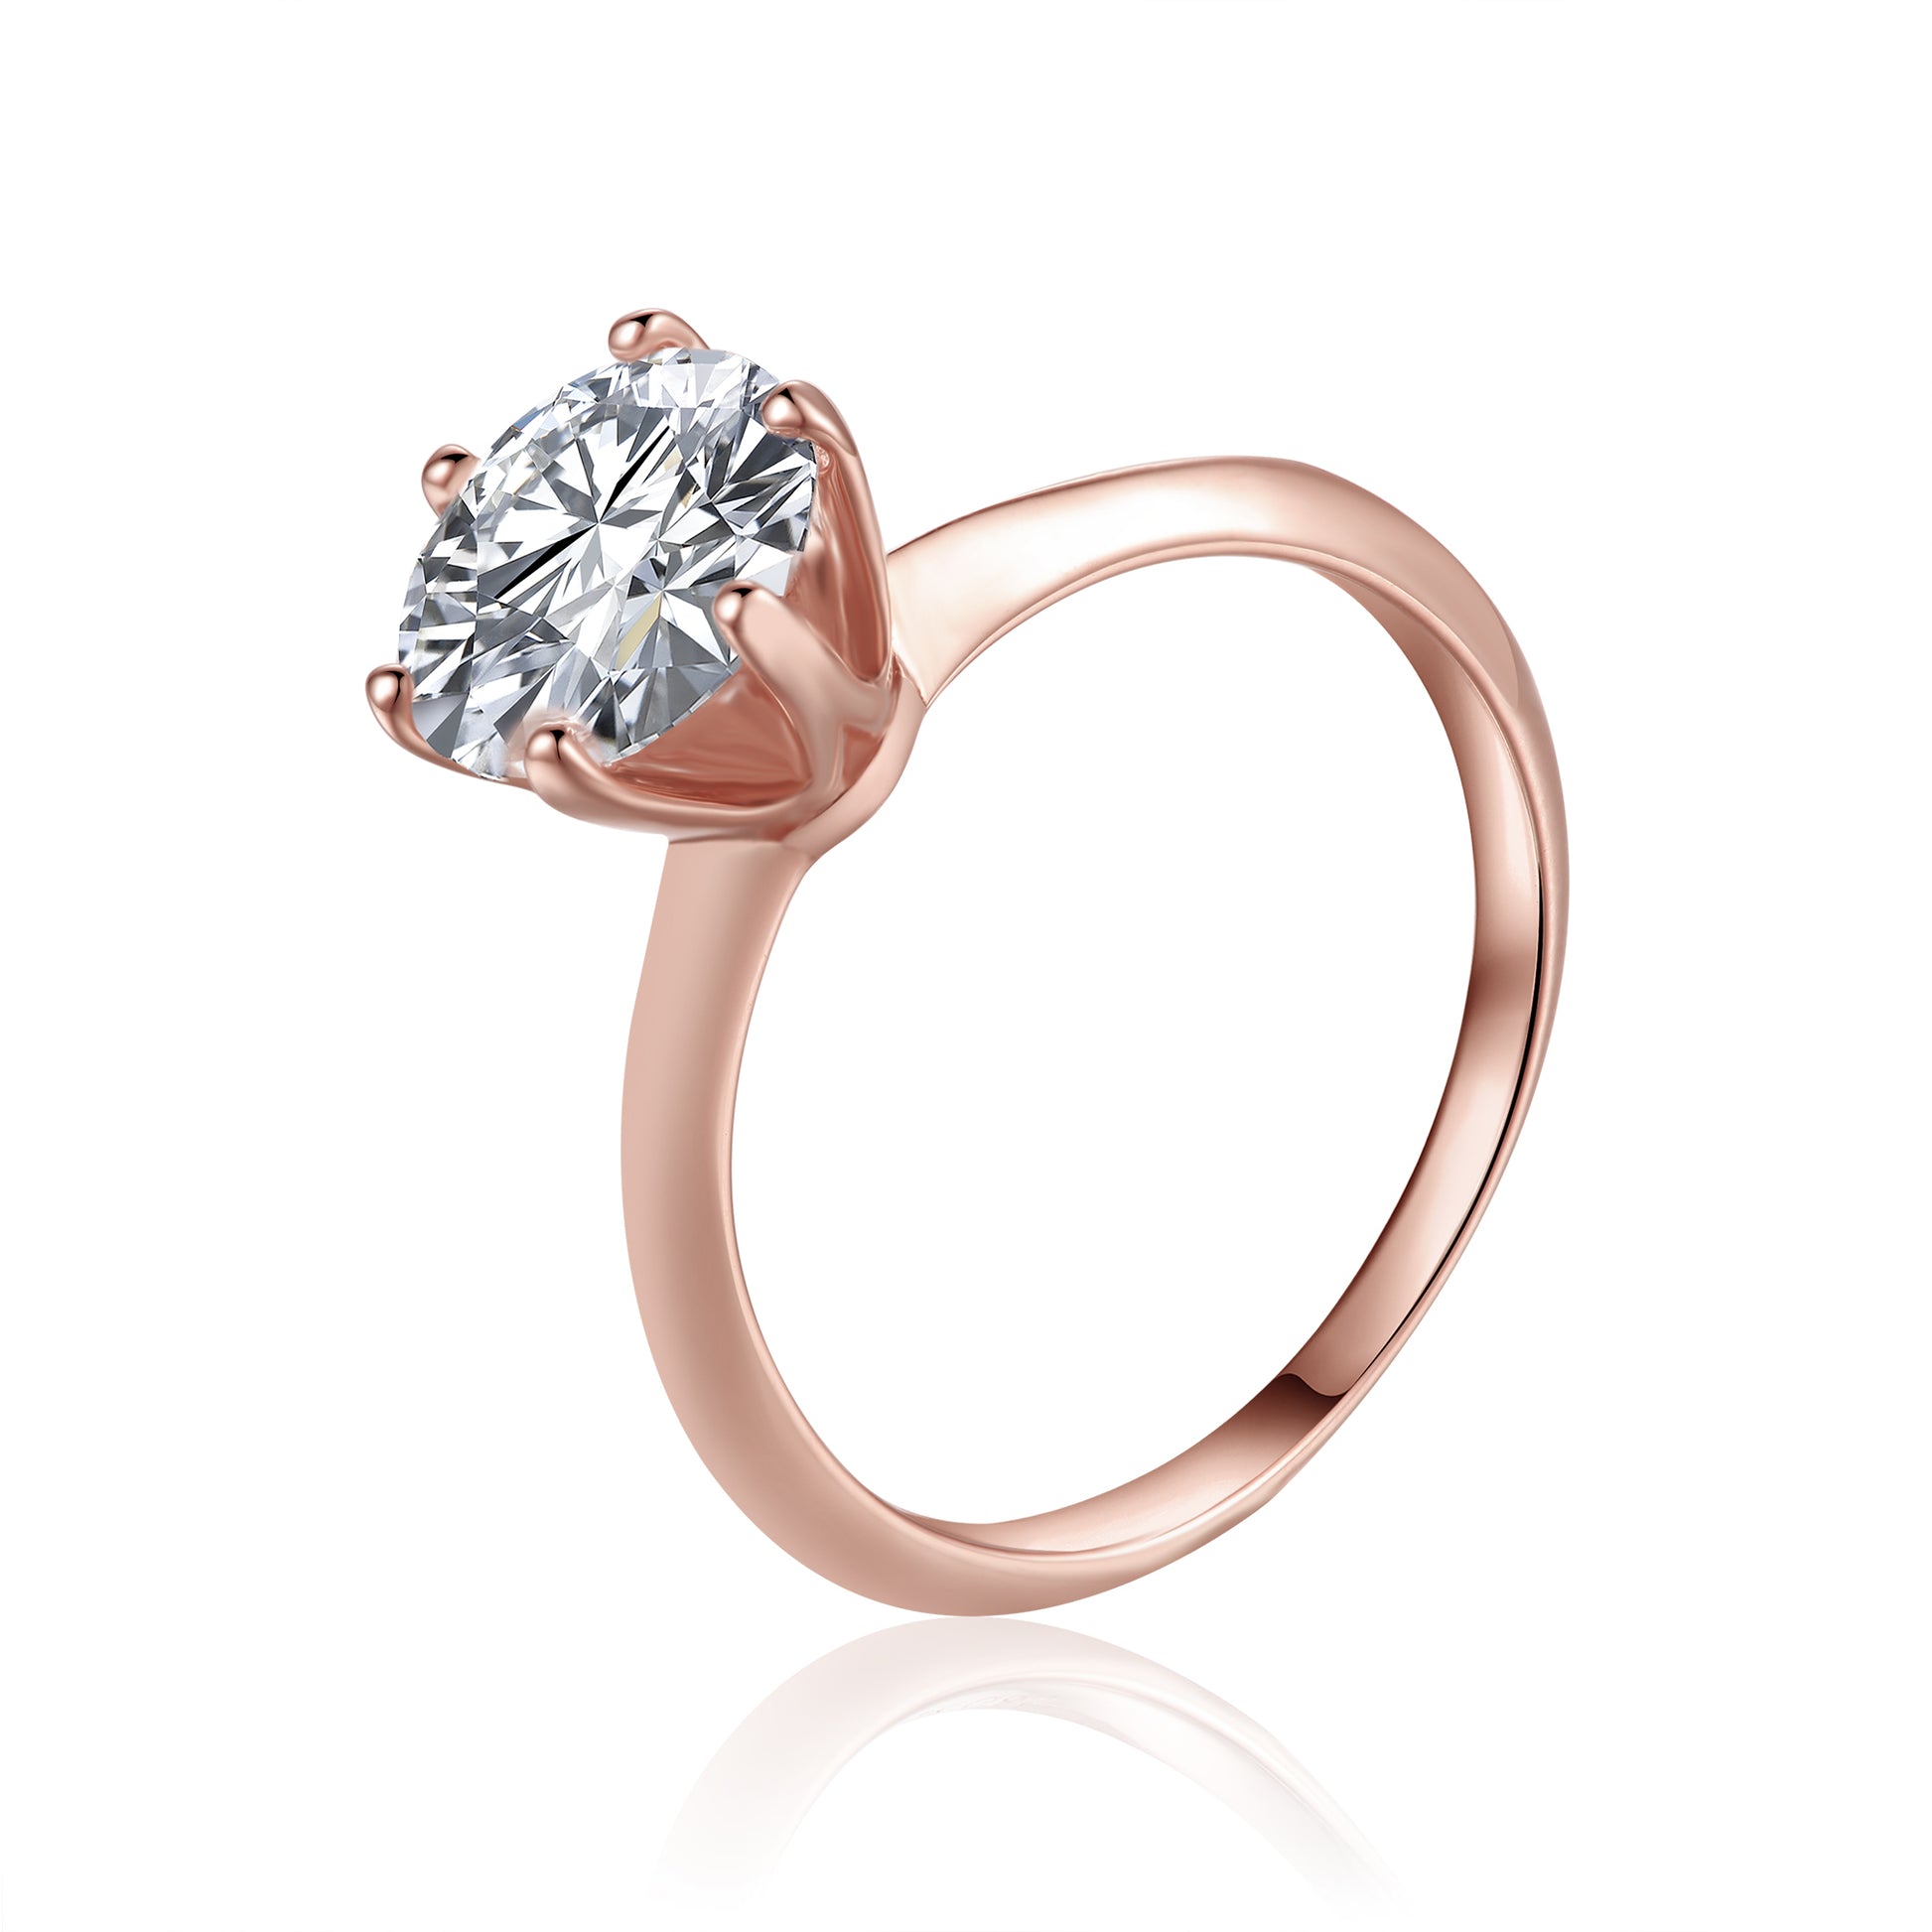 Aletté Winckler - Solitaire Tiffany 6 Claw Setting 3.00ct Moissanite Engagement Ring Set 9ct Rose Gold